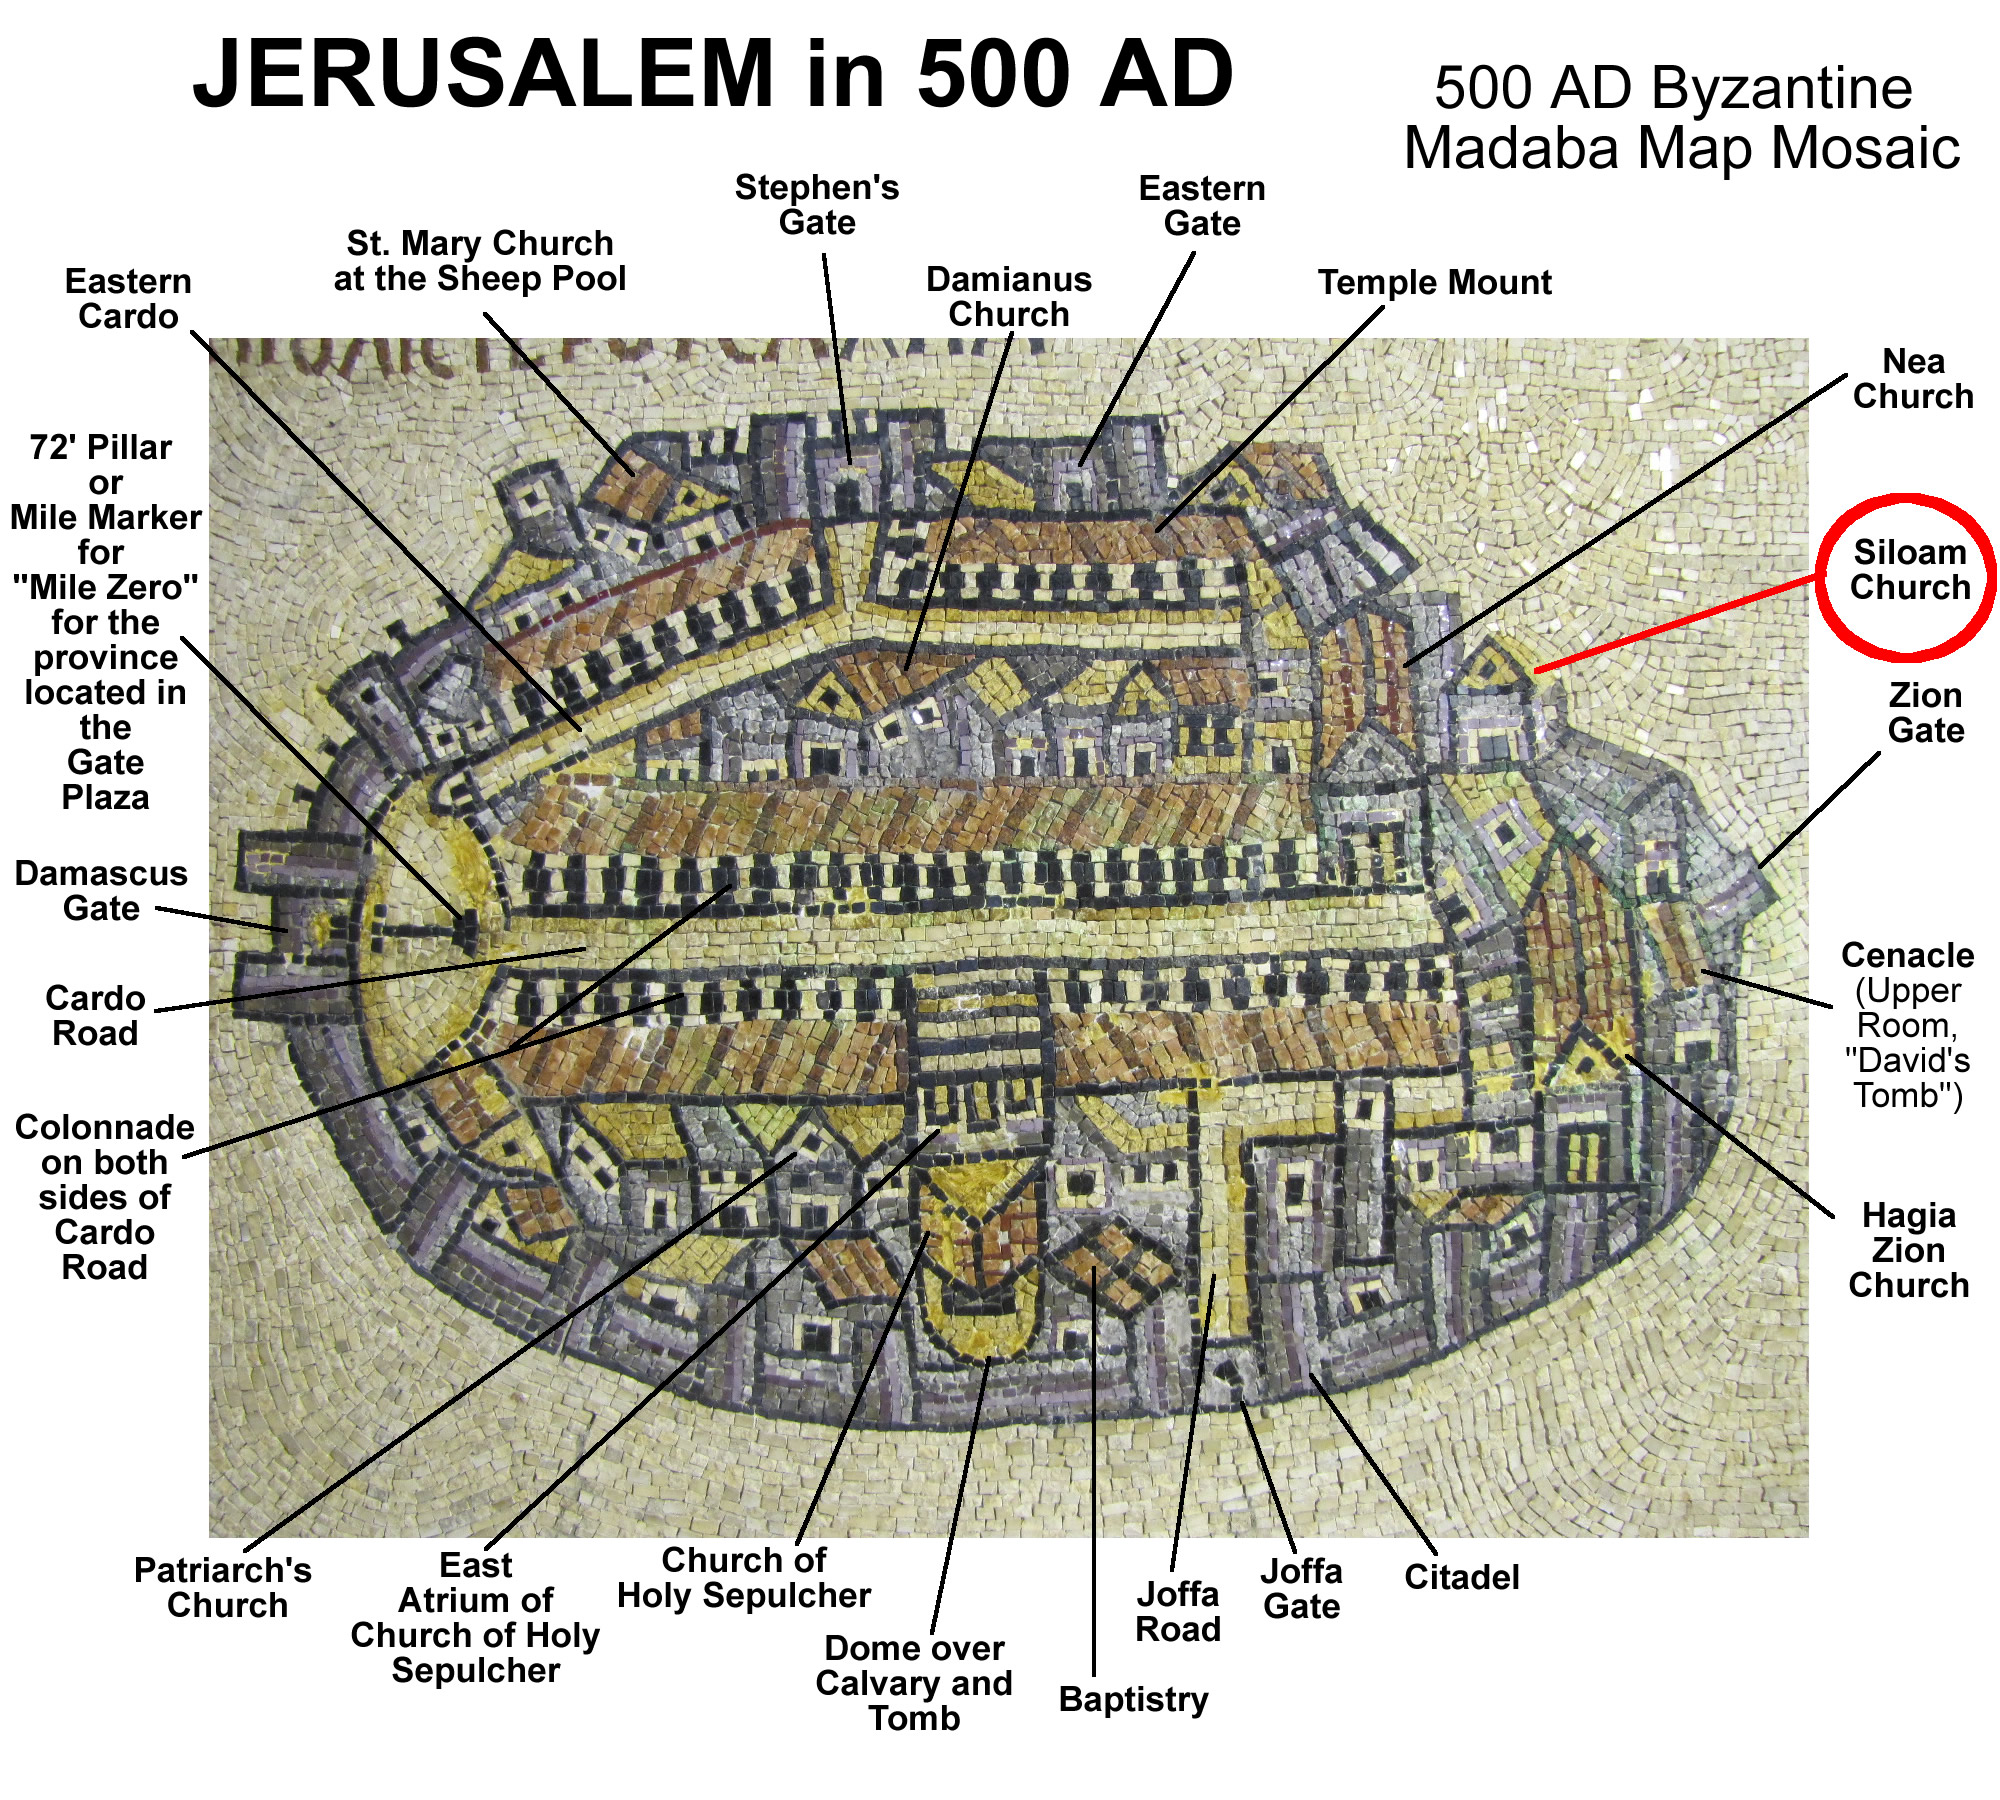 Madaba map showing the location of the Siloam Church at the end of Hezekiah's Tunnel.